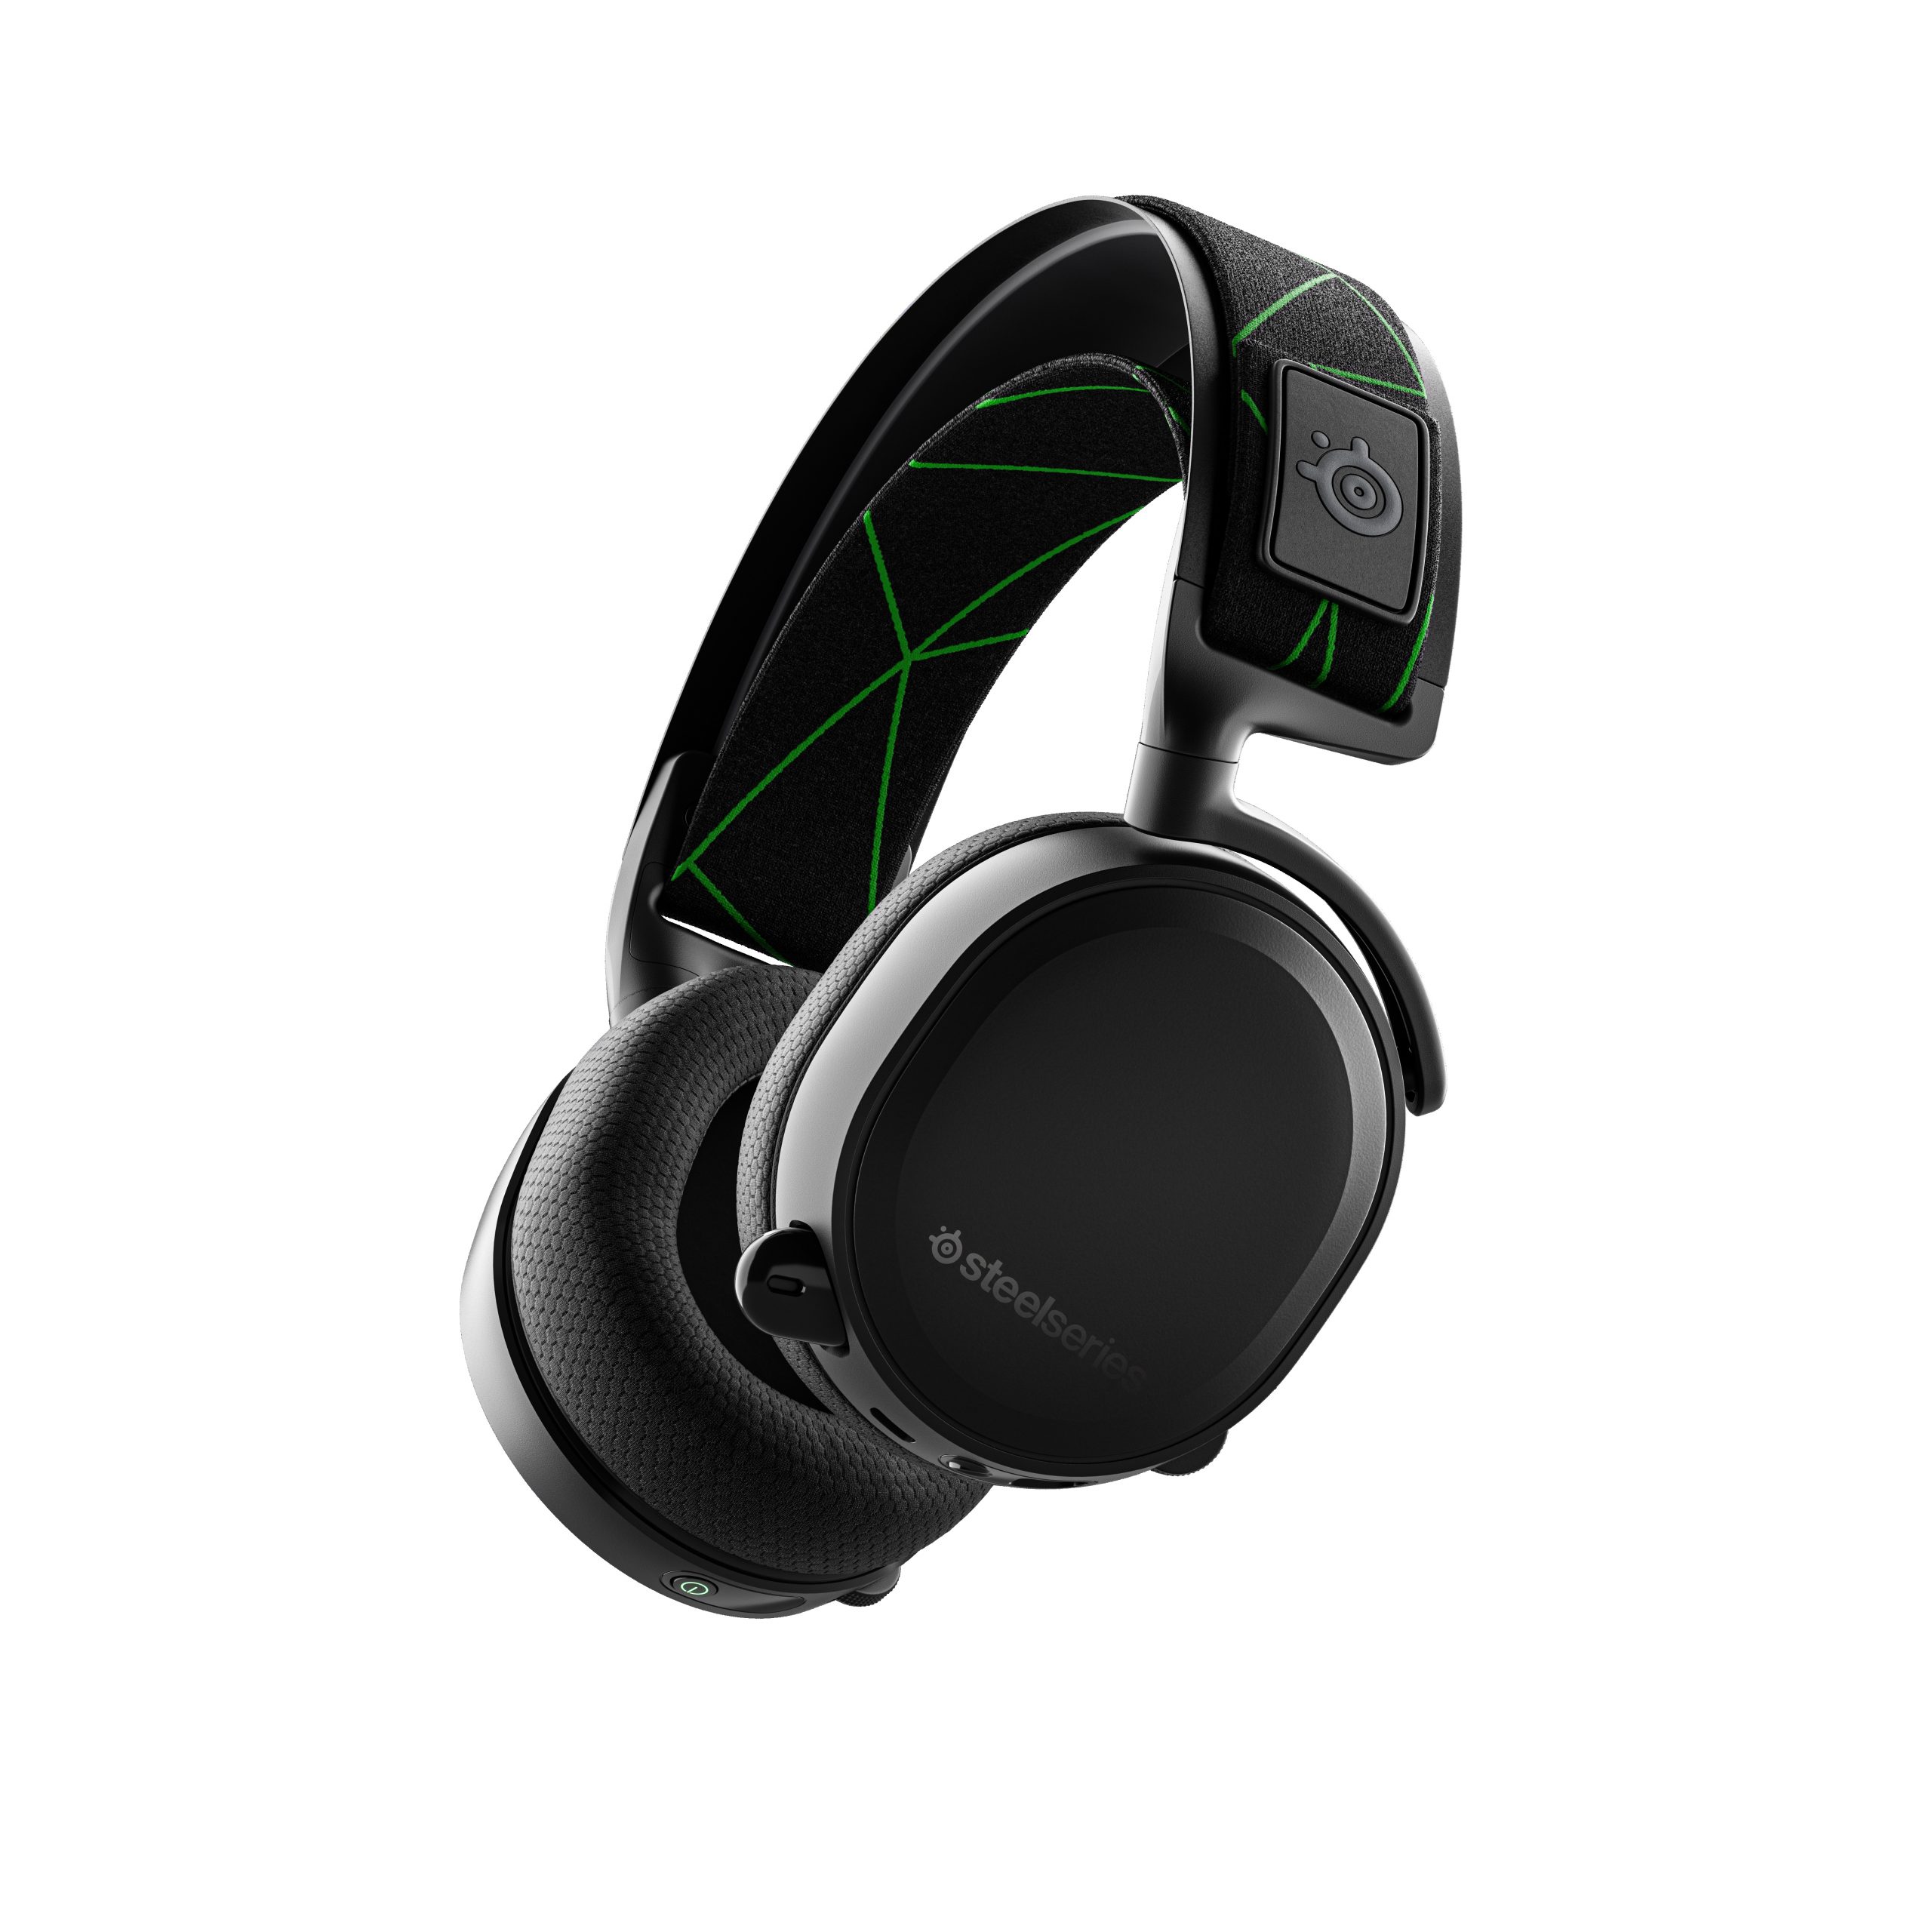 Best Wireless Gaming Headsets for Xbox